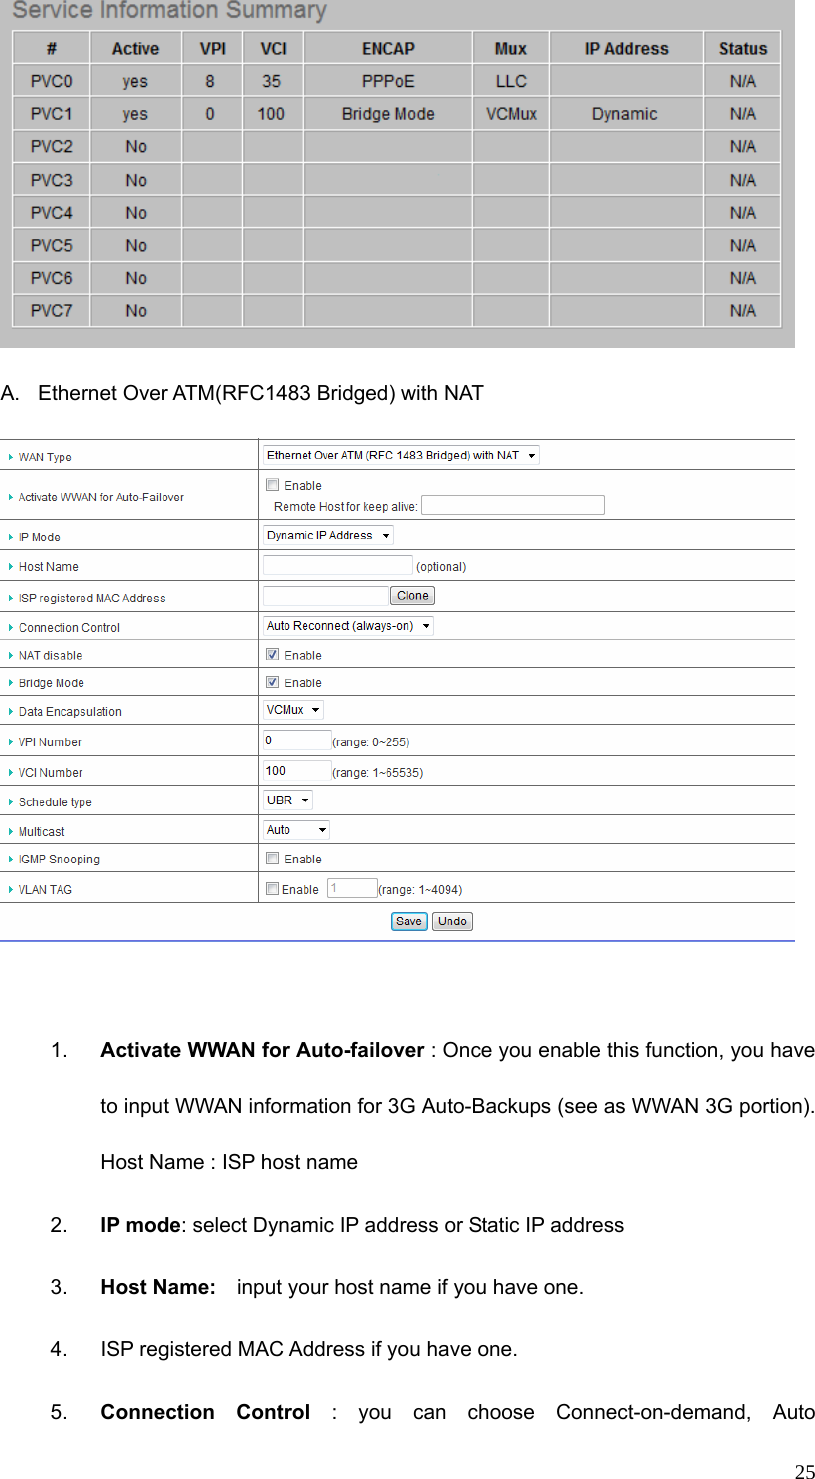  25 A.  Ethernet Over ATM(RFC1483 Bridged) with NAT   1.  Activate WWAN for Auto-failover : Once you enable this function, you have to input WWAN information for 3G Auto-Backups (see as WWAN 3G portion). Host Name : ISP host name 2.  IP mode: select Dynamic IP address or Static IP address 3.  Host Name:    input your host name if you have one. 4.  ISP registered MAC Address if you have one. 5.  Connection Control : you can choose Connect-on-demand, Auto 